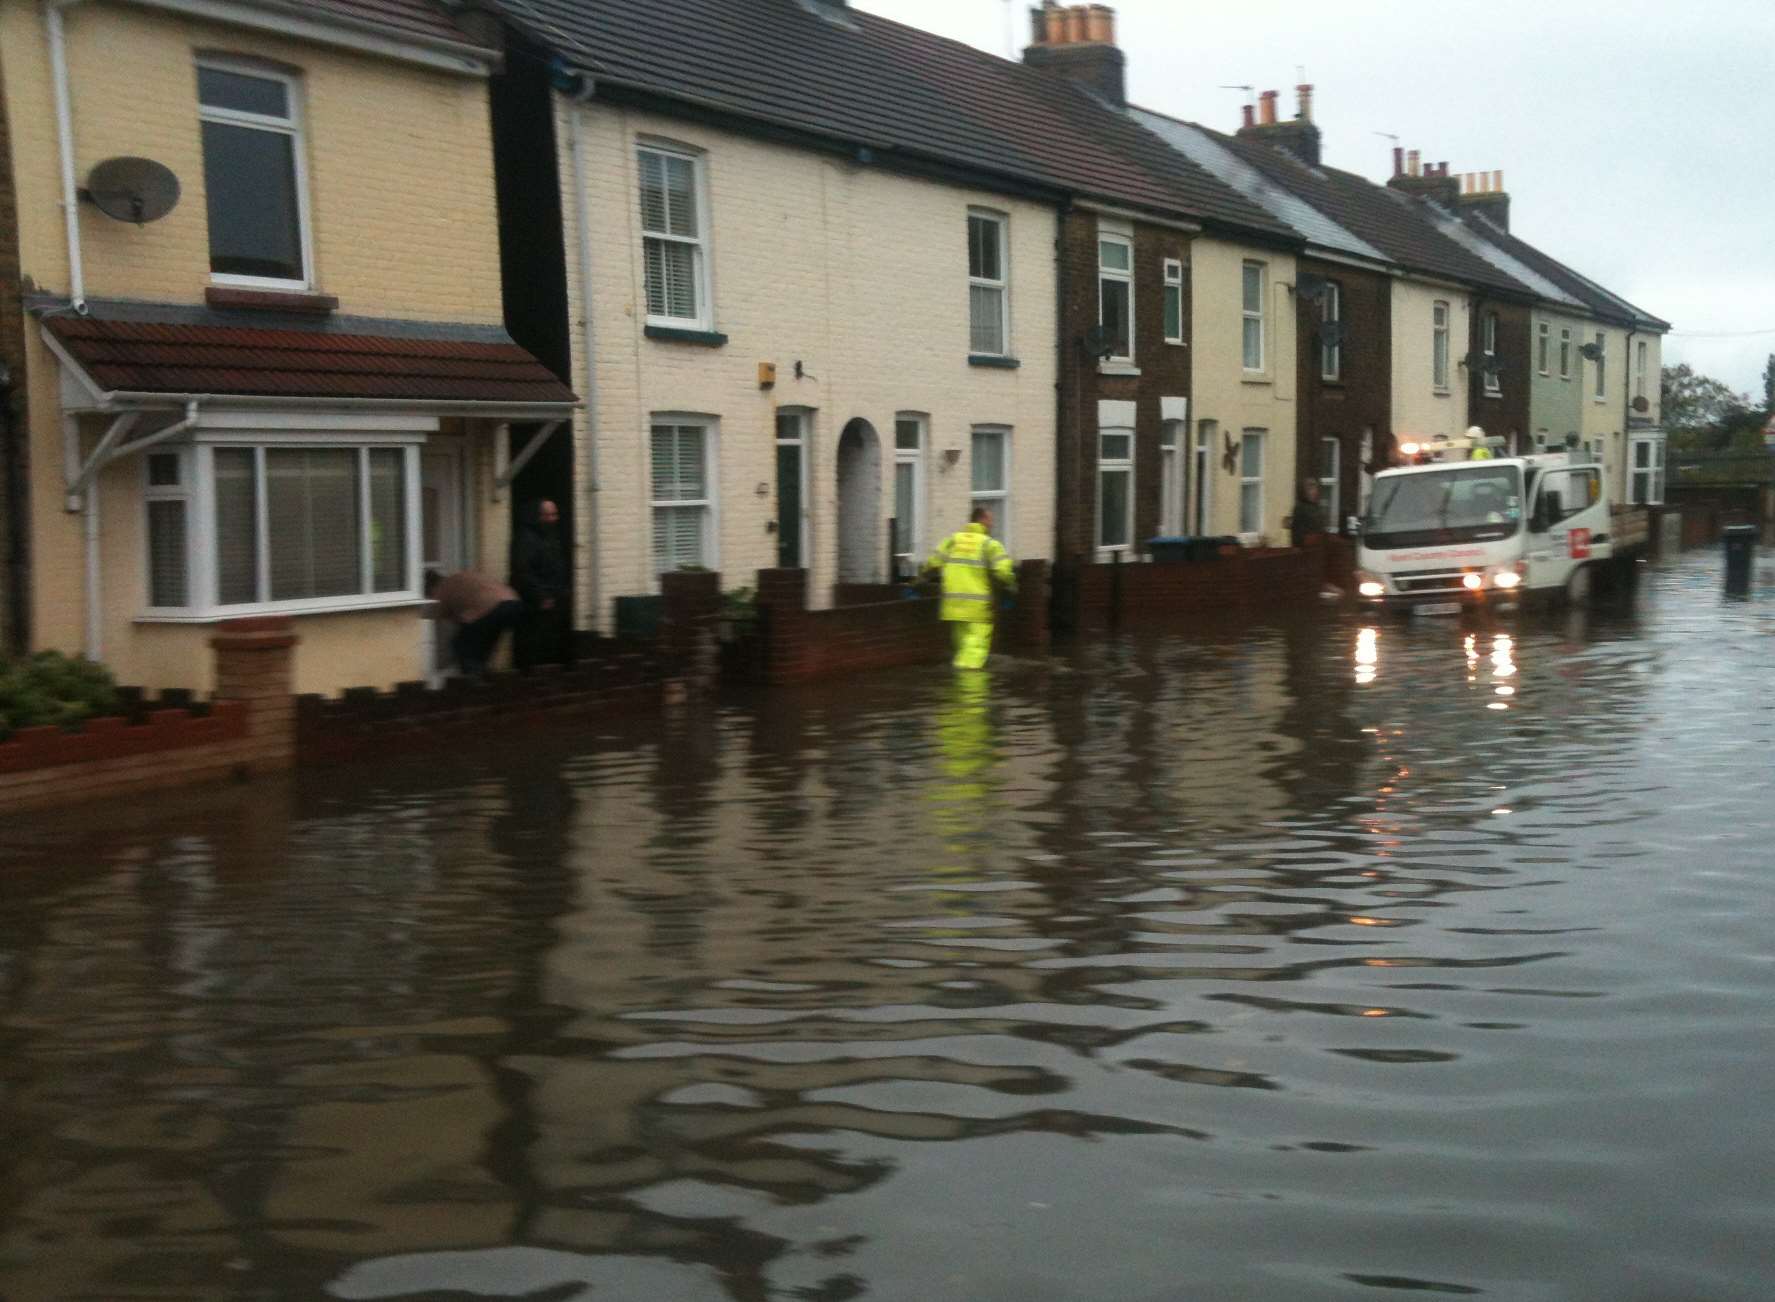 This picture taken by Nick Cavell shows Albert Road's flooding when heavy rain falls.